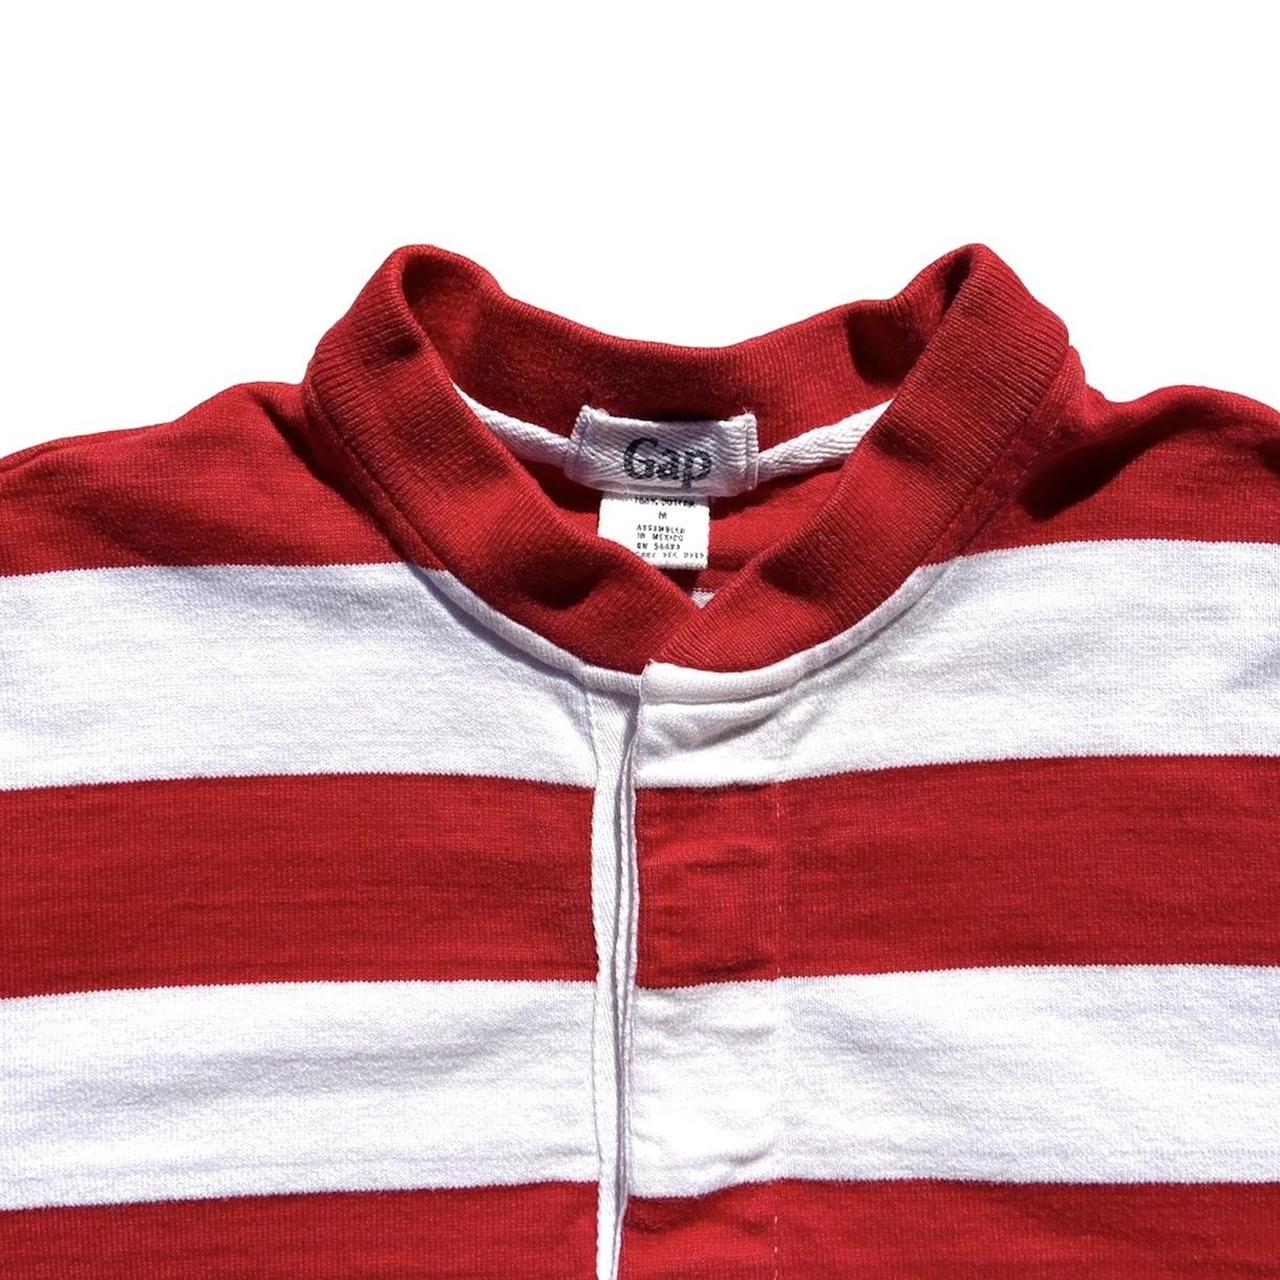 80’s Vintage Gap Clothing Red and White Striped Long... - Depop